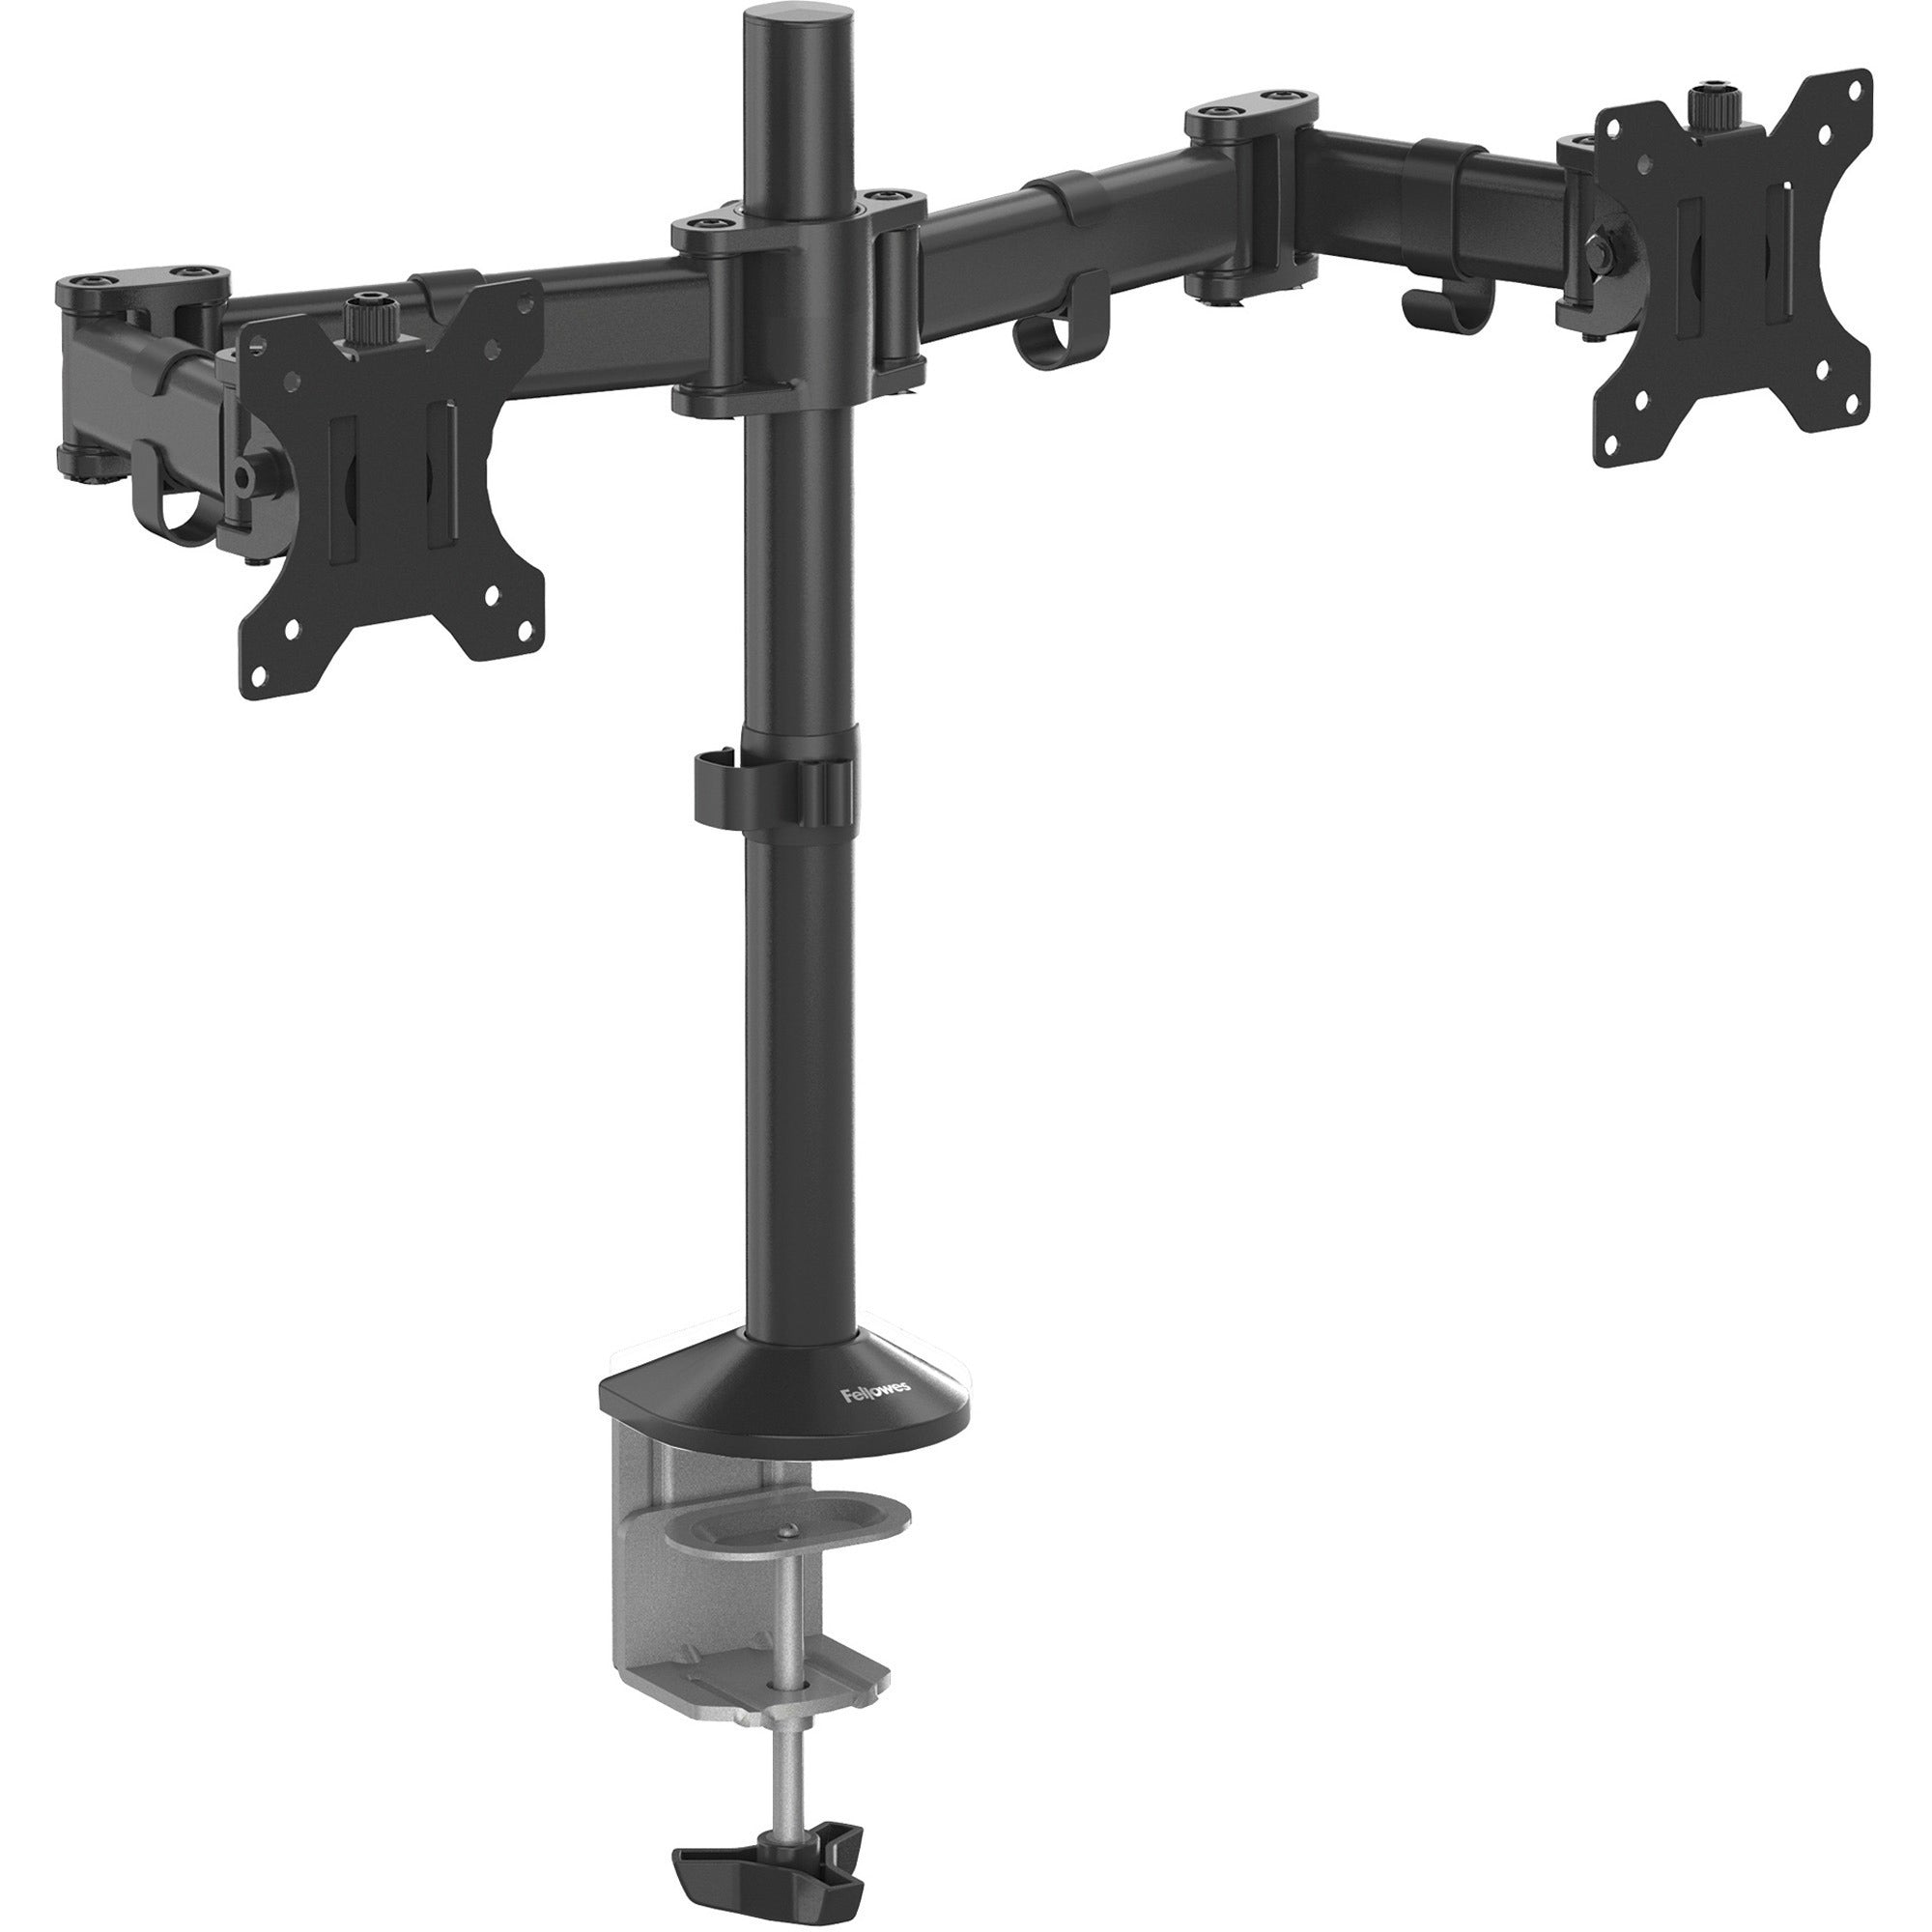 fellowes-reflex-dual-monitor-arm-2-displays-supported-30-screen-support-48-lb-load-capacity_fel8502601 - 2